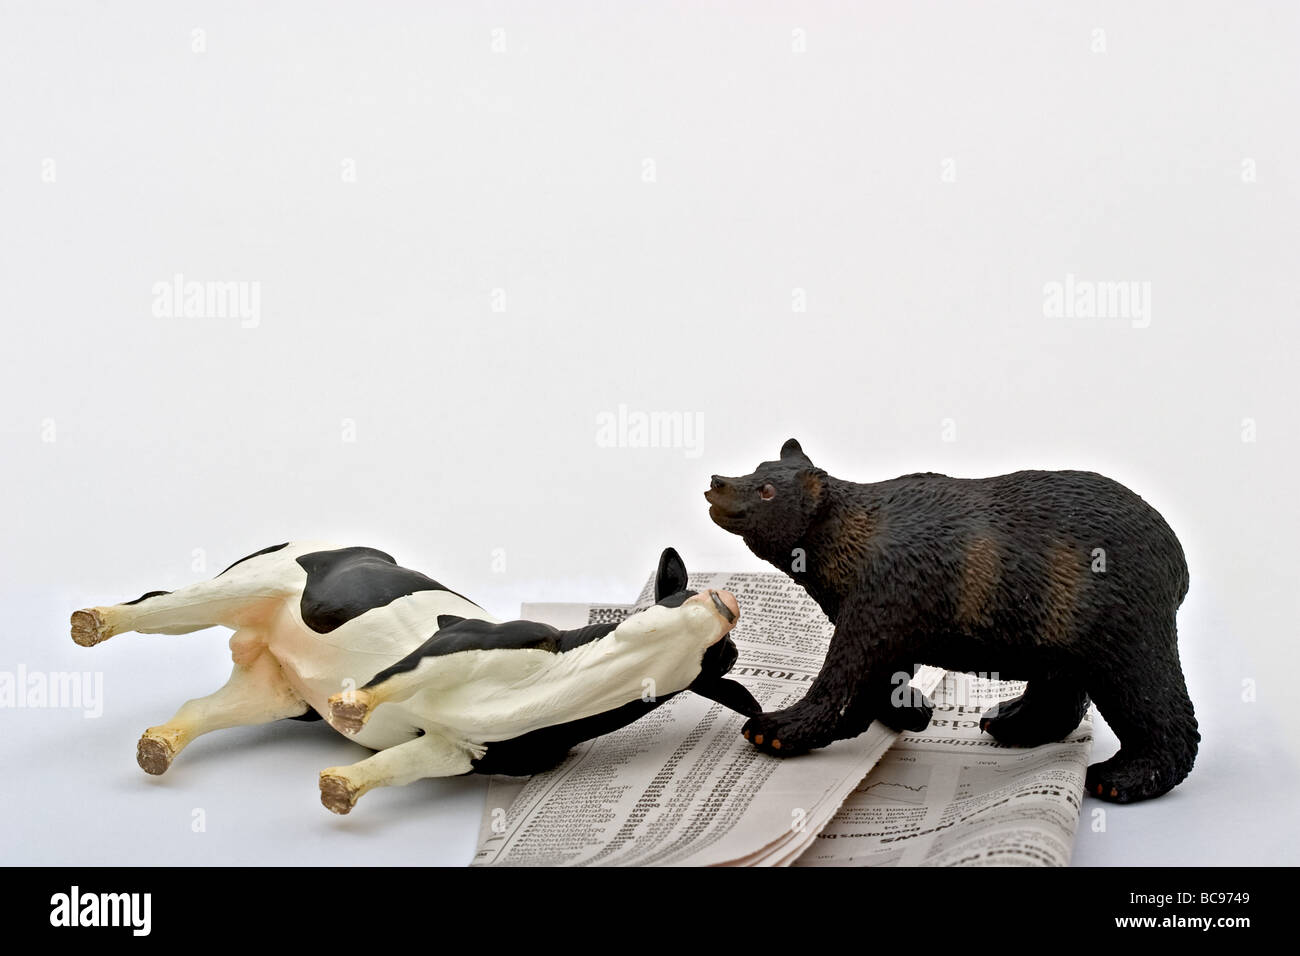 Bear standing by a bull lying on it's side upon a stock market listing. Stock Photo